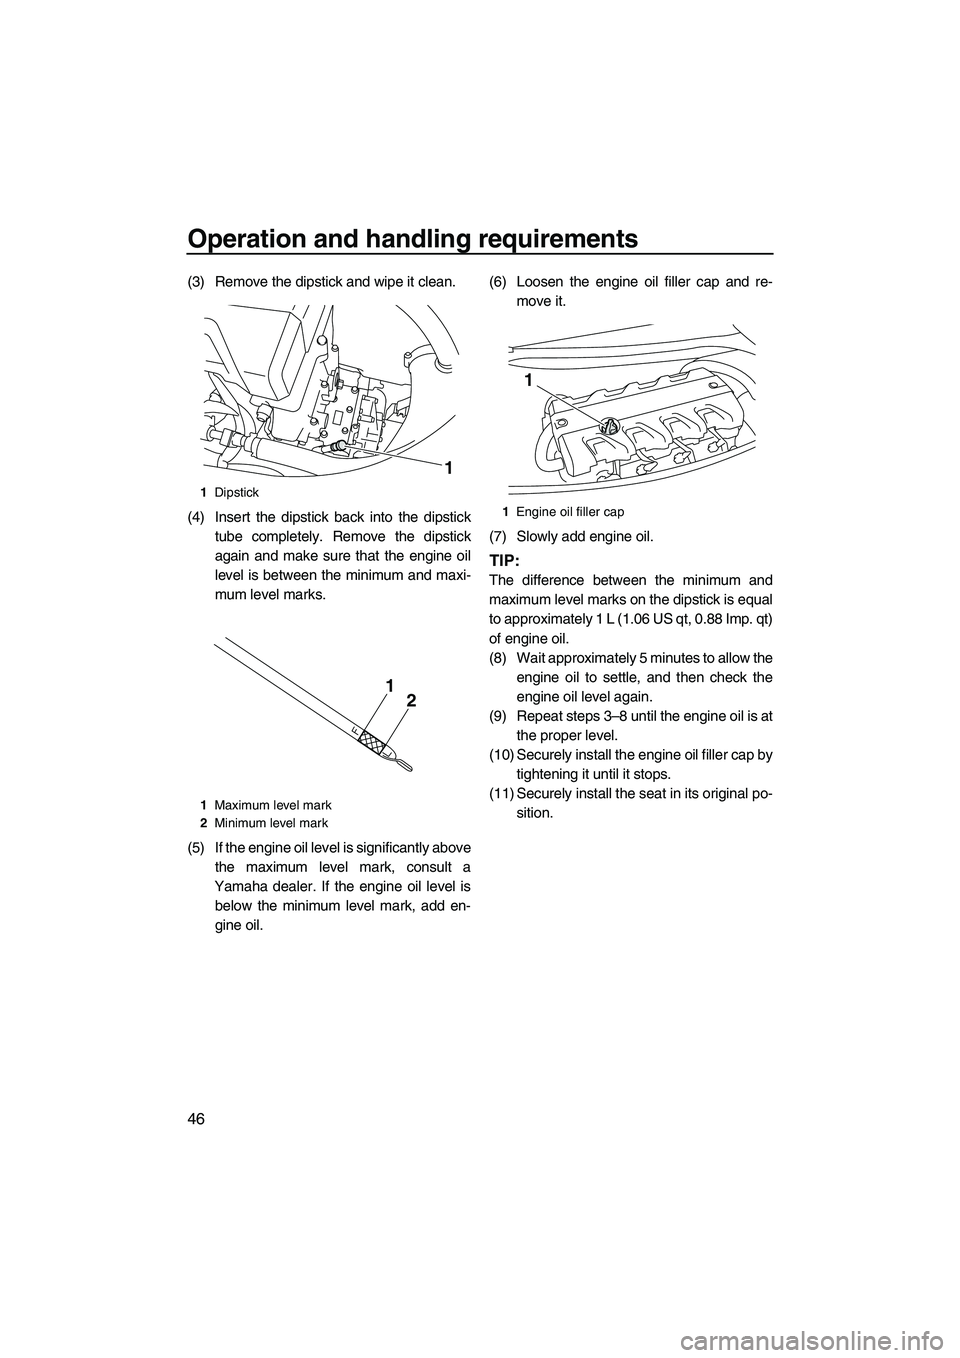 YAMAHA VXS 2012  Owners Manual Operation and handling requirements
46
(3) Remove the dipstick and wipe it clean.
(4) Insert the dipstick back into the dipstick
tube completely. Remove the dipstick
again and make sure that the engin